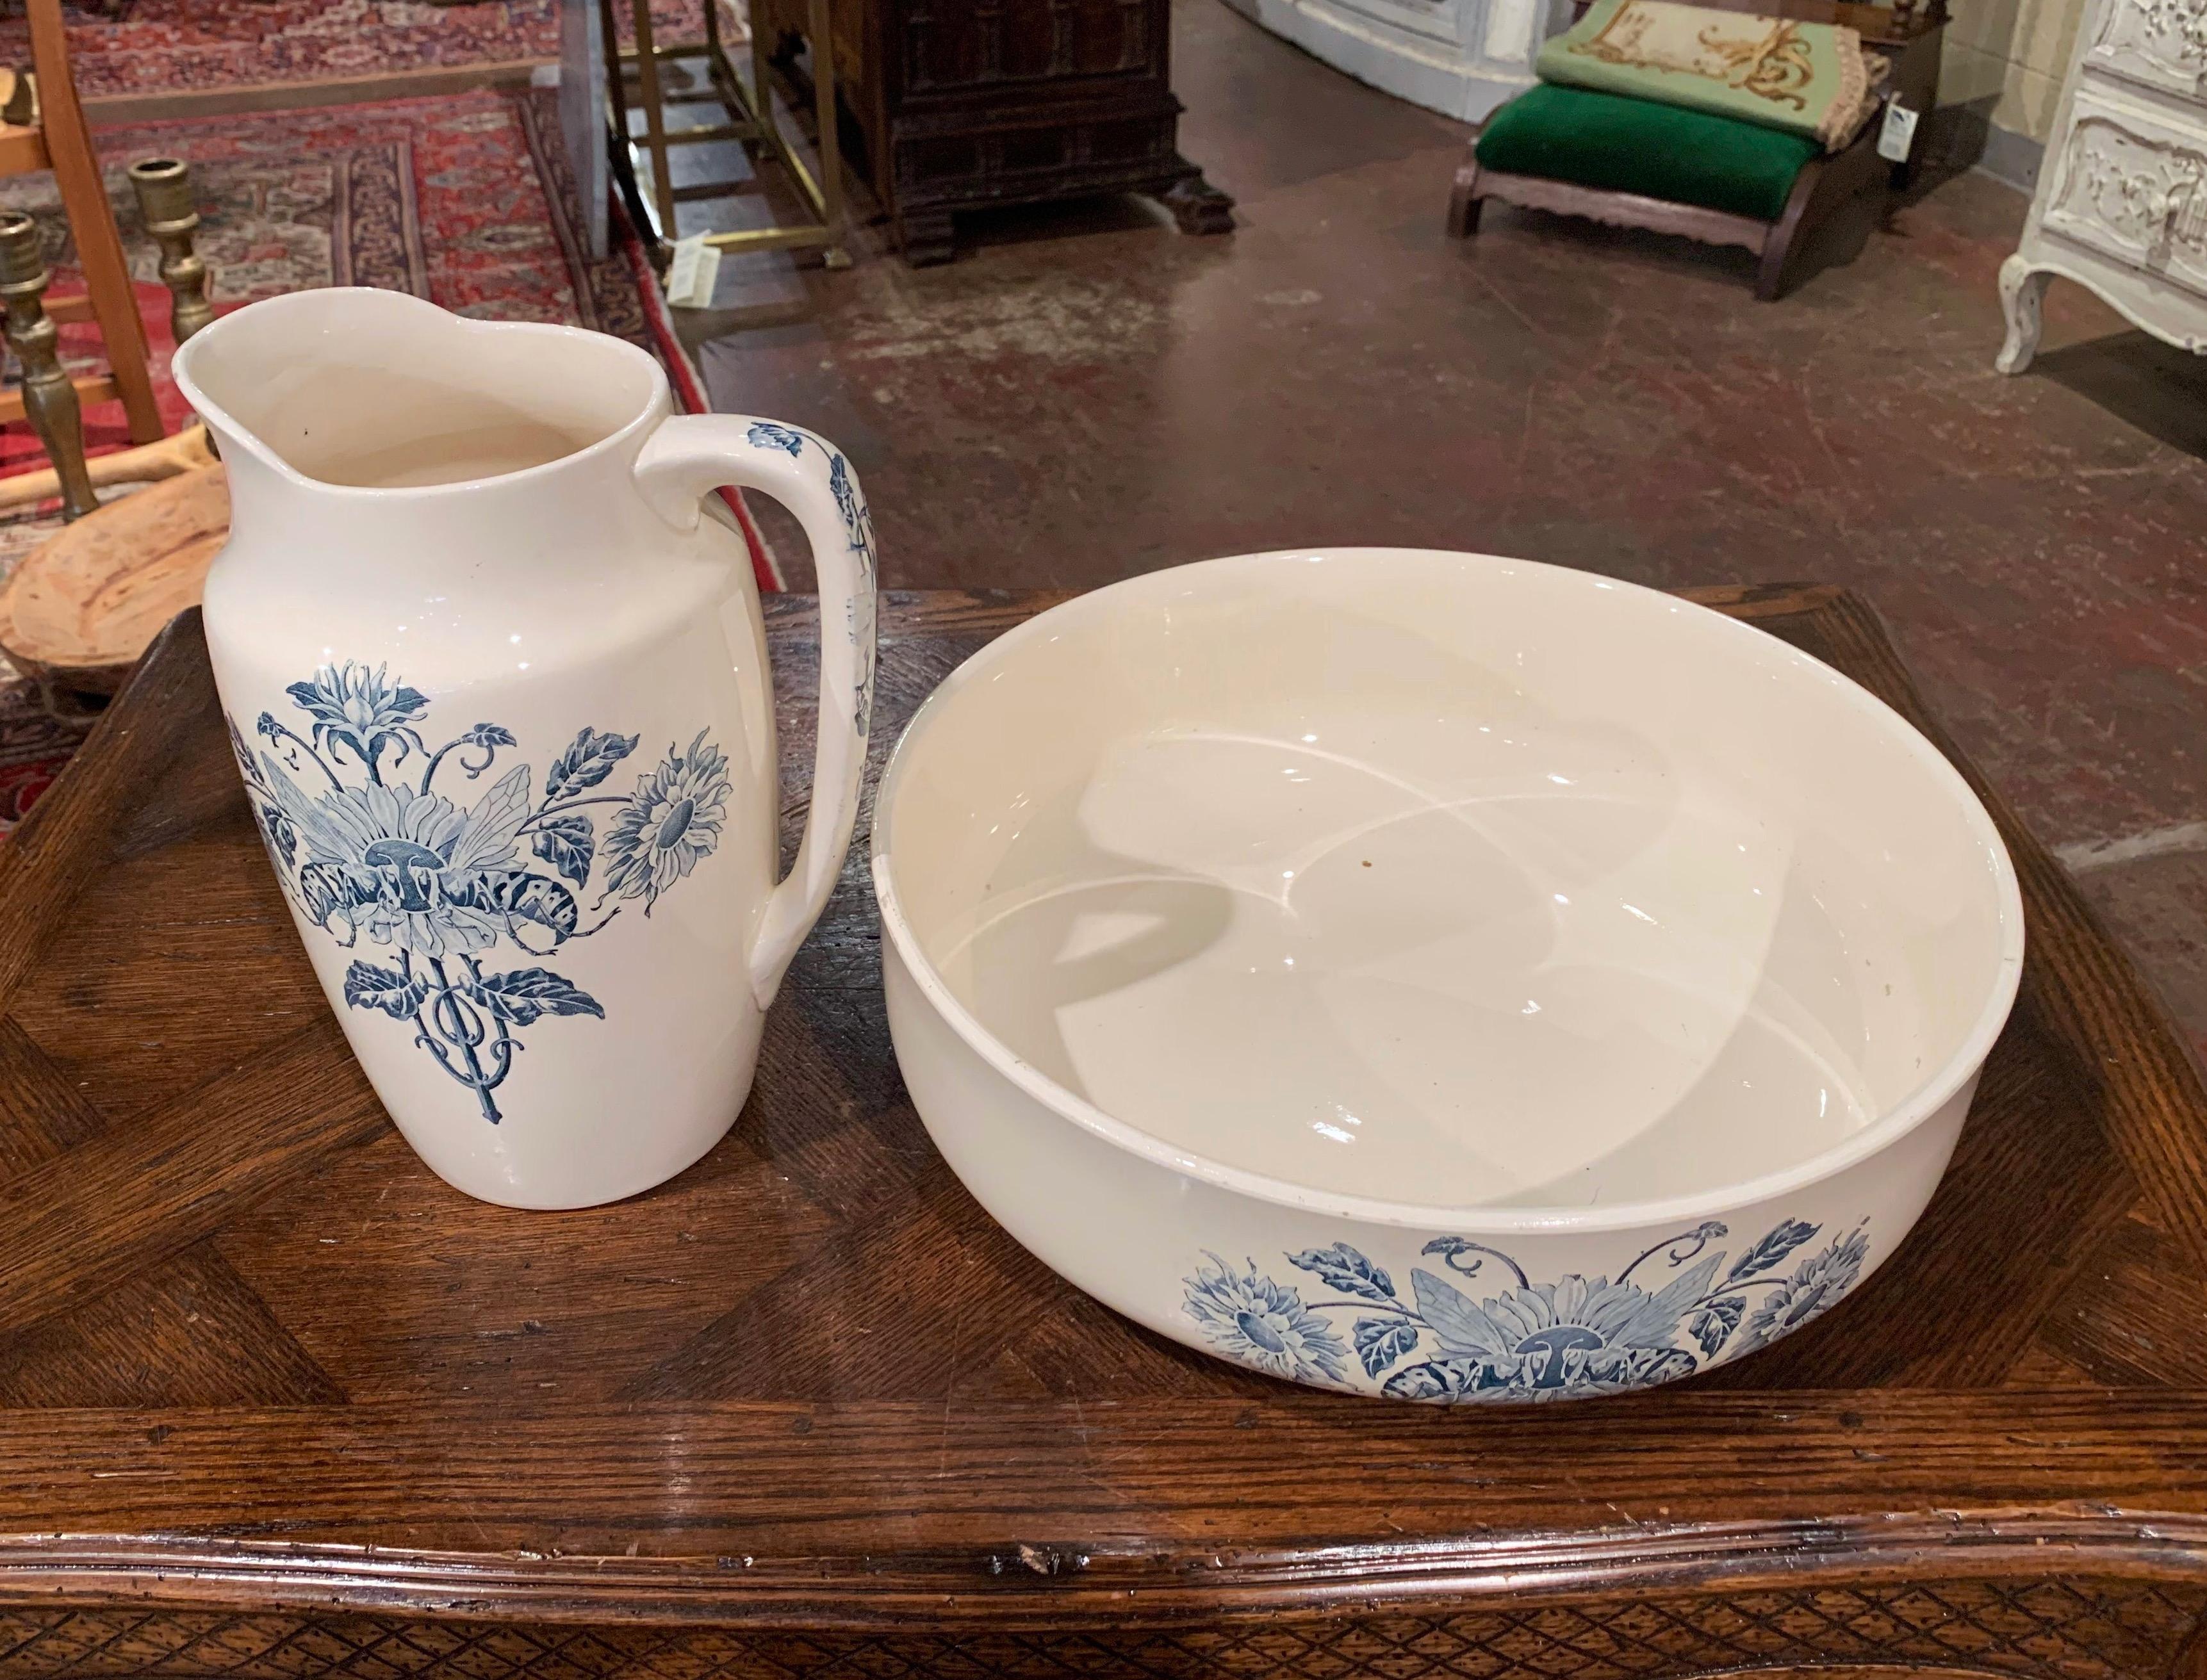 Hand-Crafted 19th Century French Hand Painted Ceramic Wash Bowl and Pitcher from Longchamp